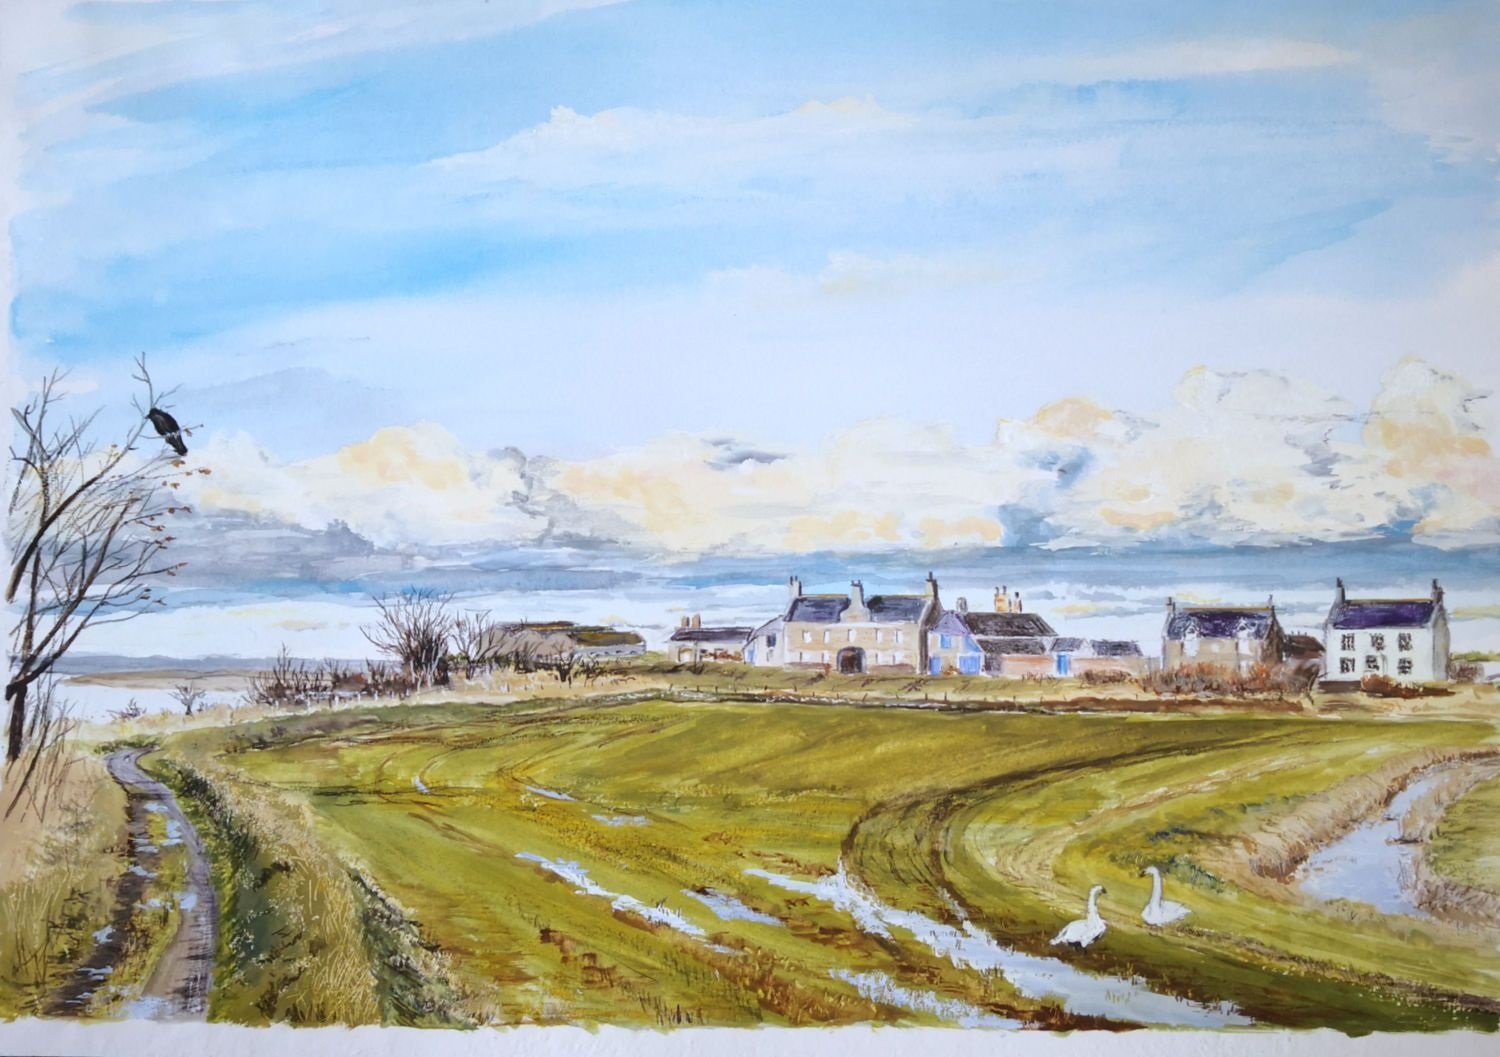 Spey Bay in winter. Framed fine art giclee print - ready to hang. FREE P&P IN UK